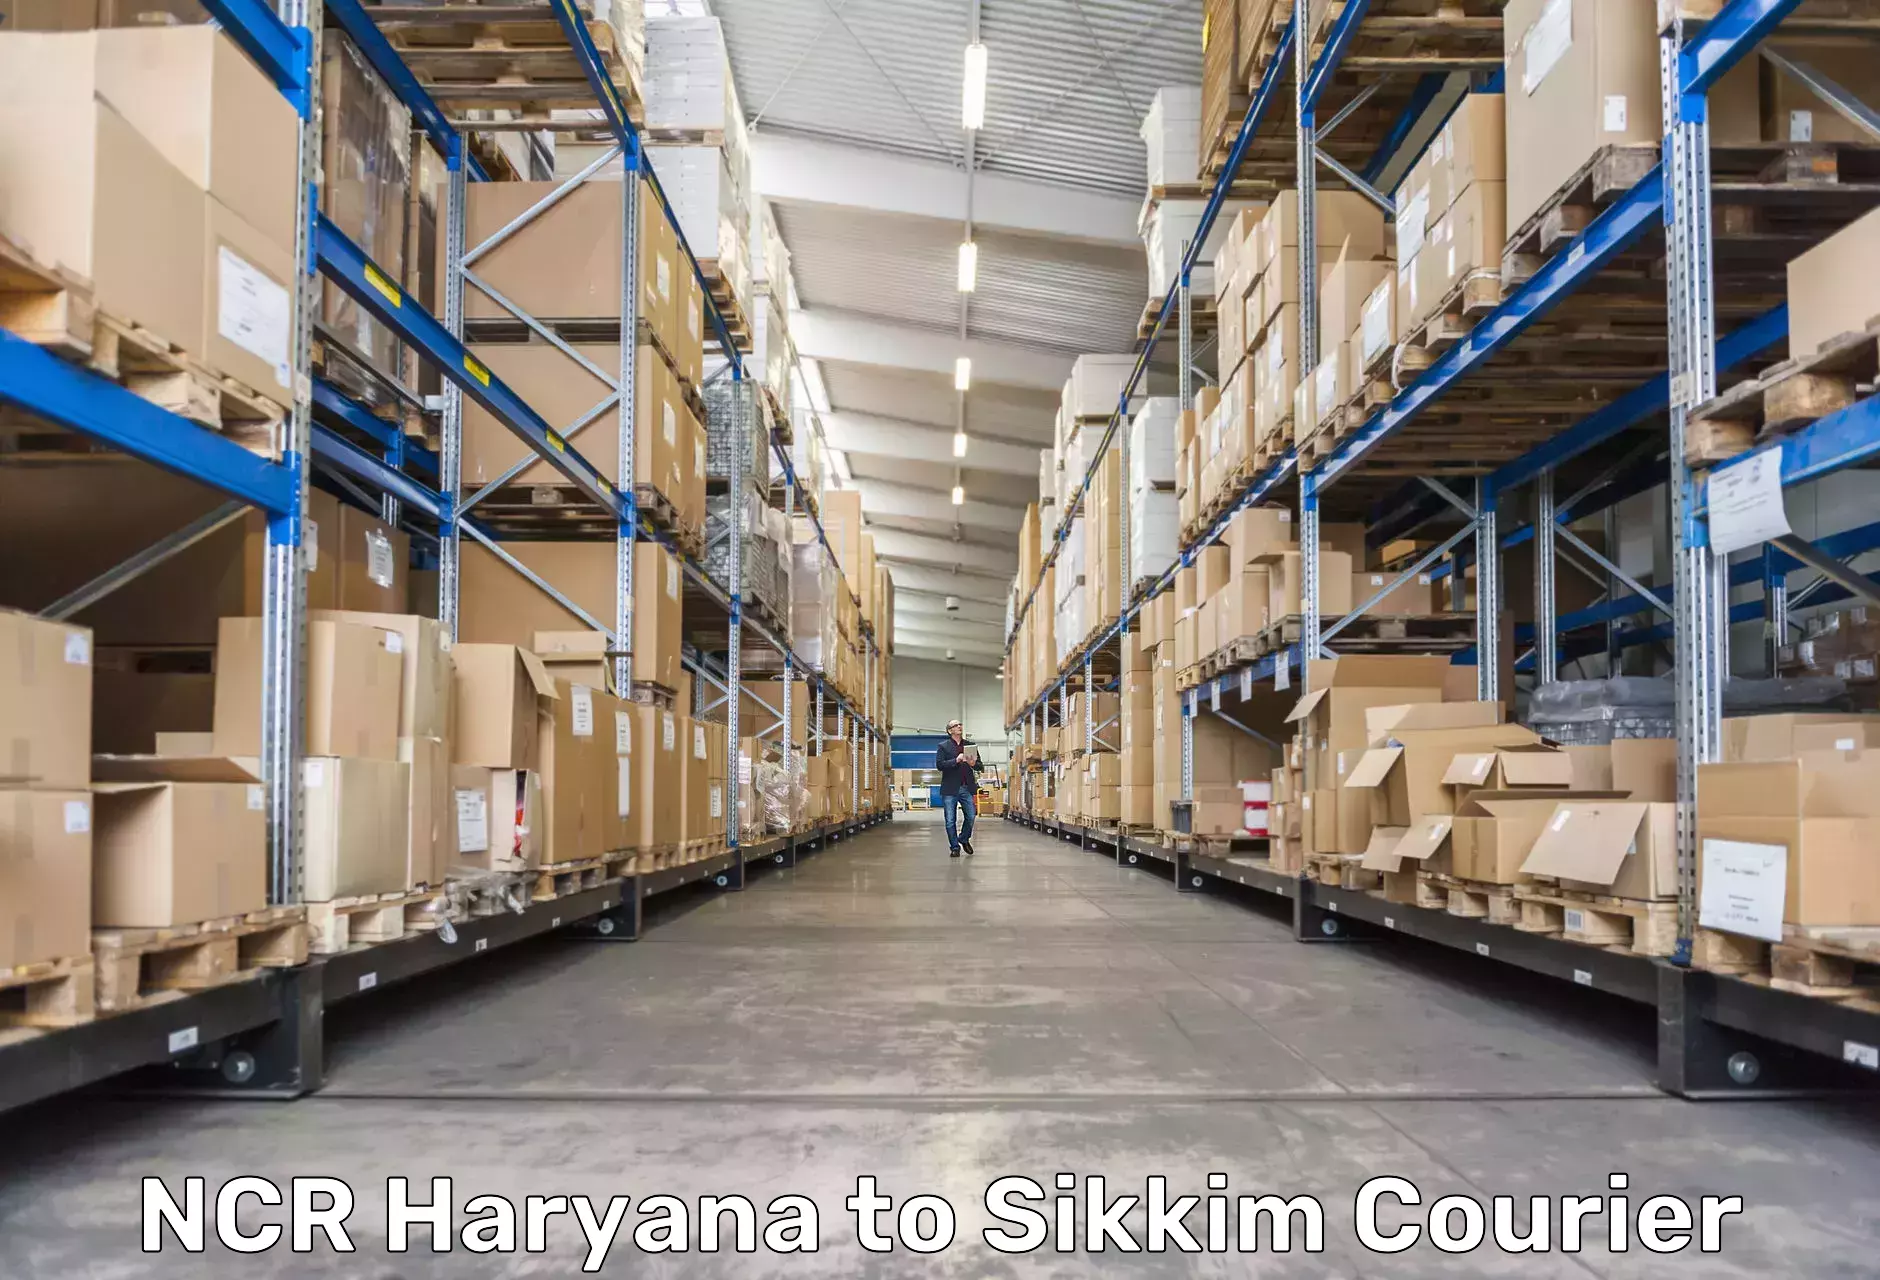 Speedy delivery service NCR Haryana to South Sikkim